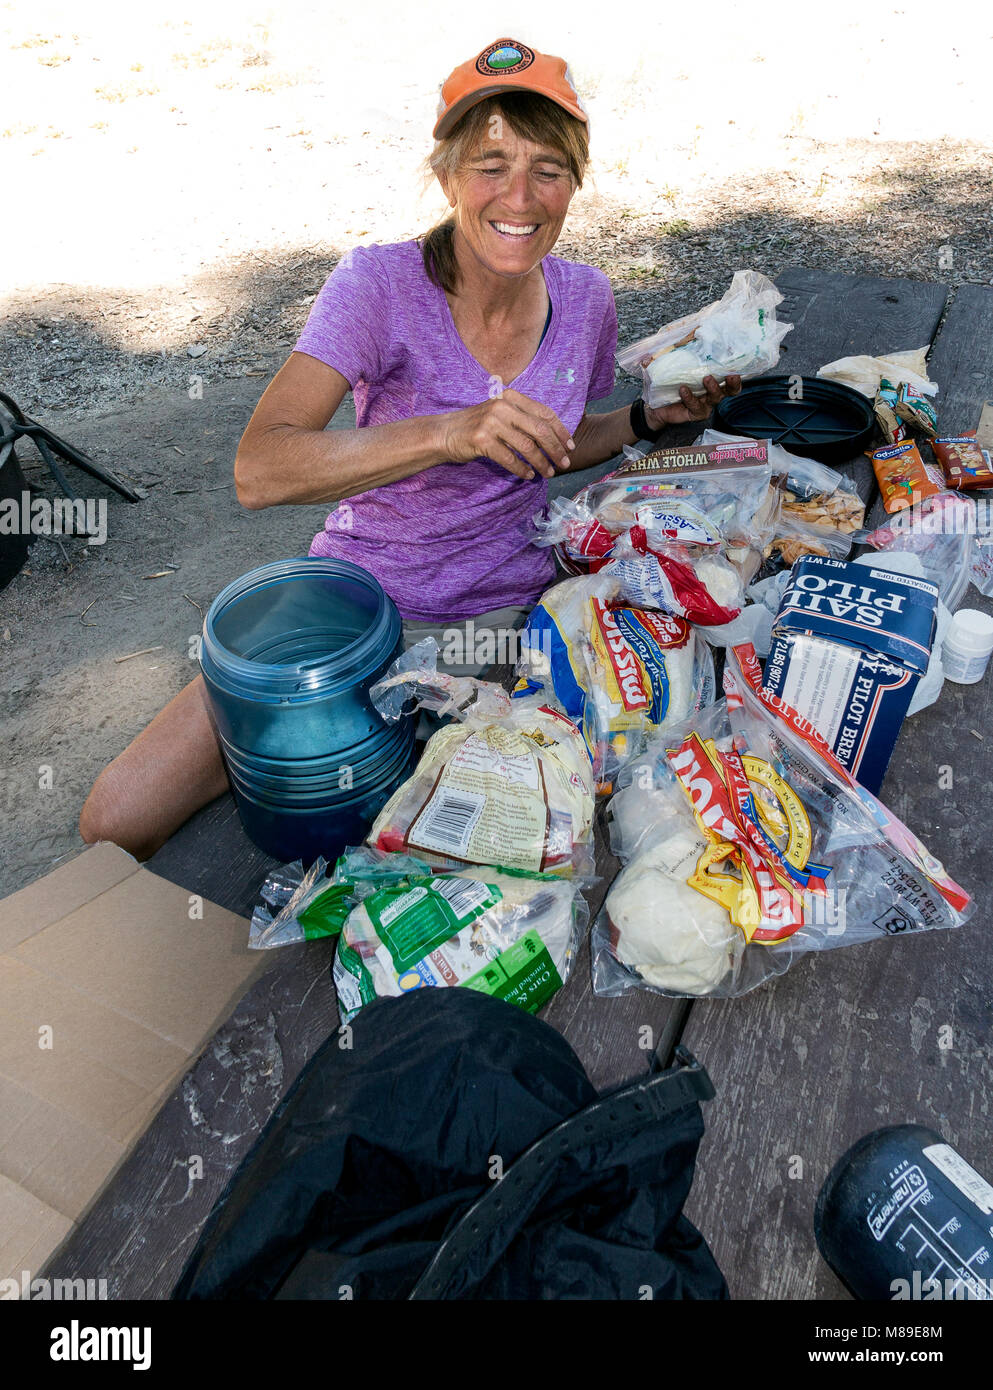 CA03358-00...CALIFORNIA - Food resuply along the John Muir Trail at Reds Meadows in Devils Post Pile National Monument . MR# S1) Stock Photo